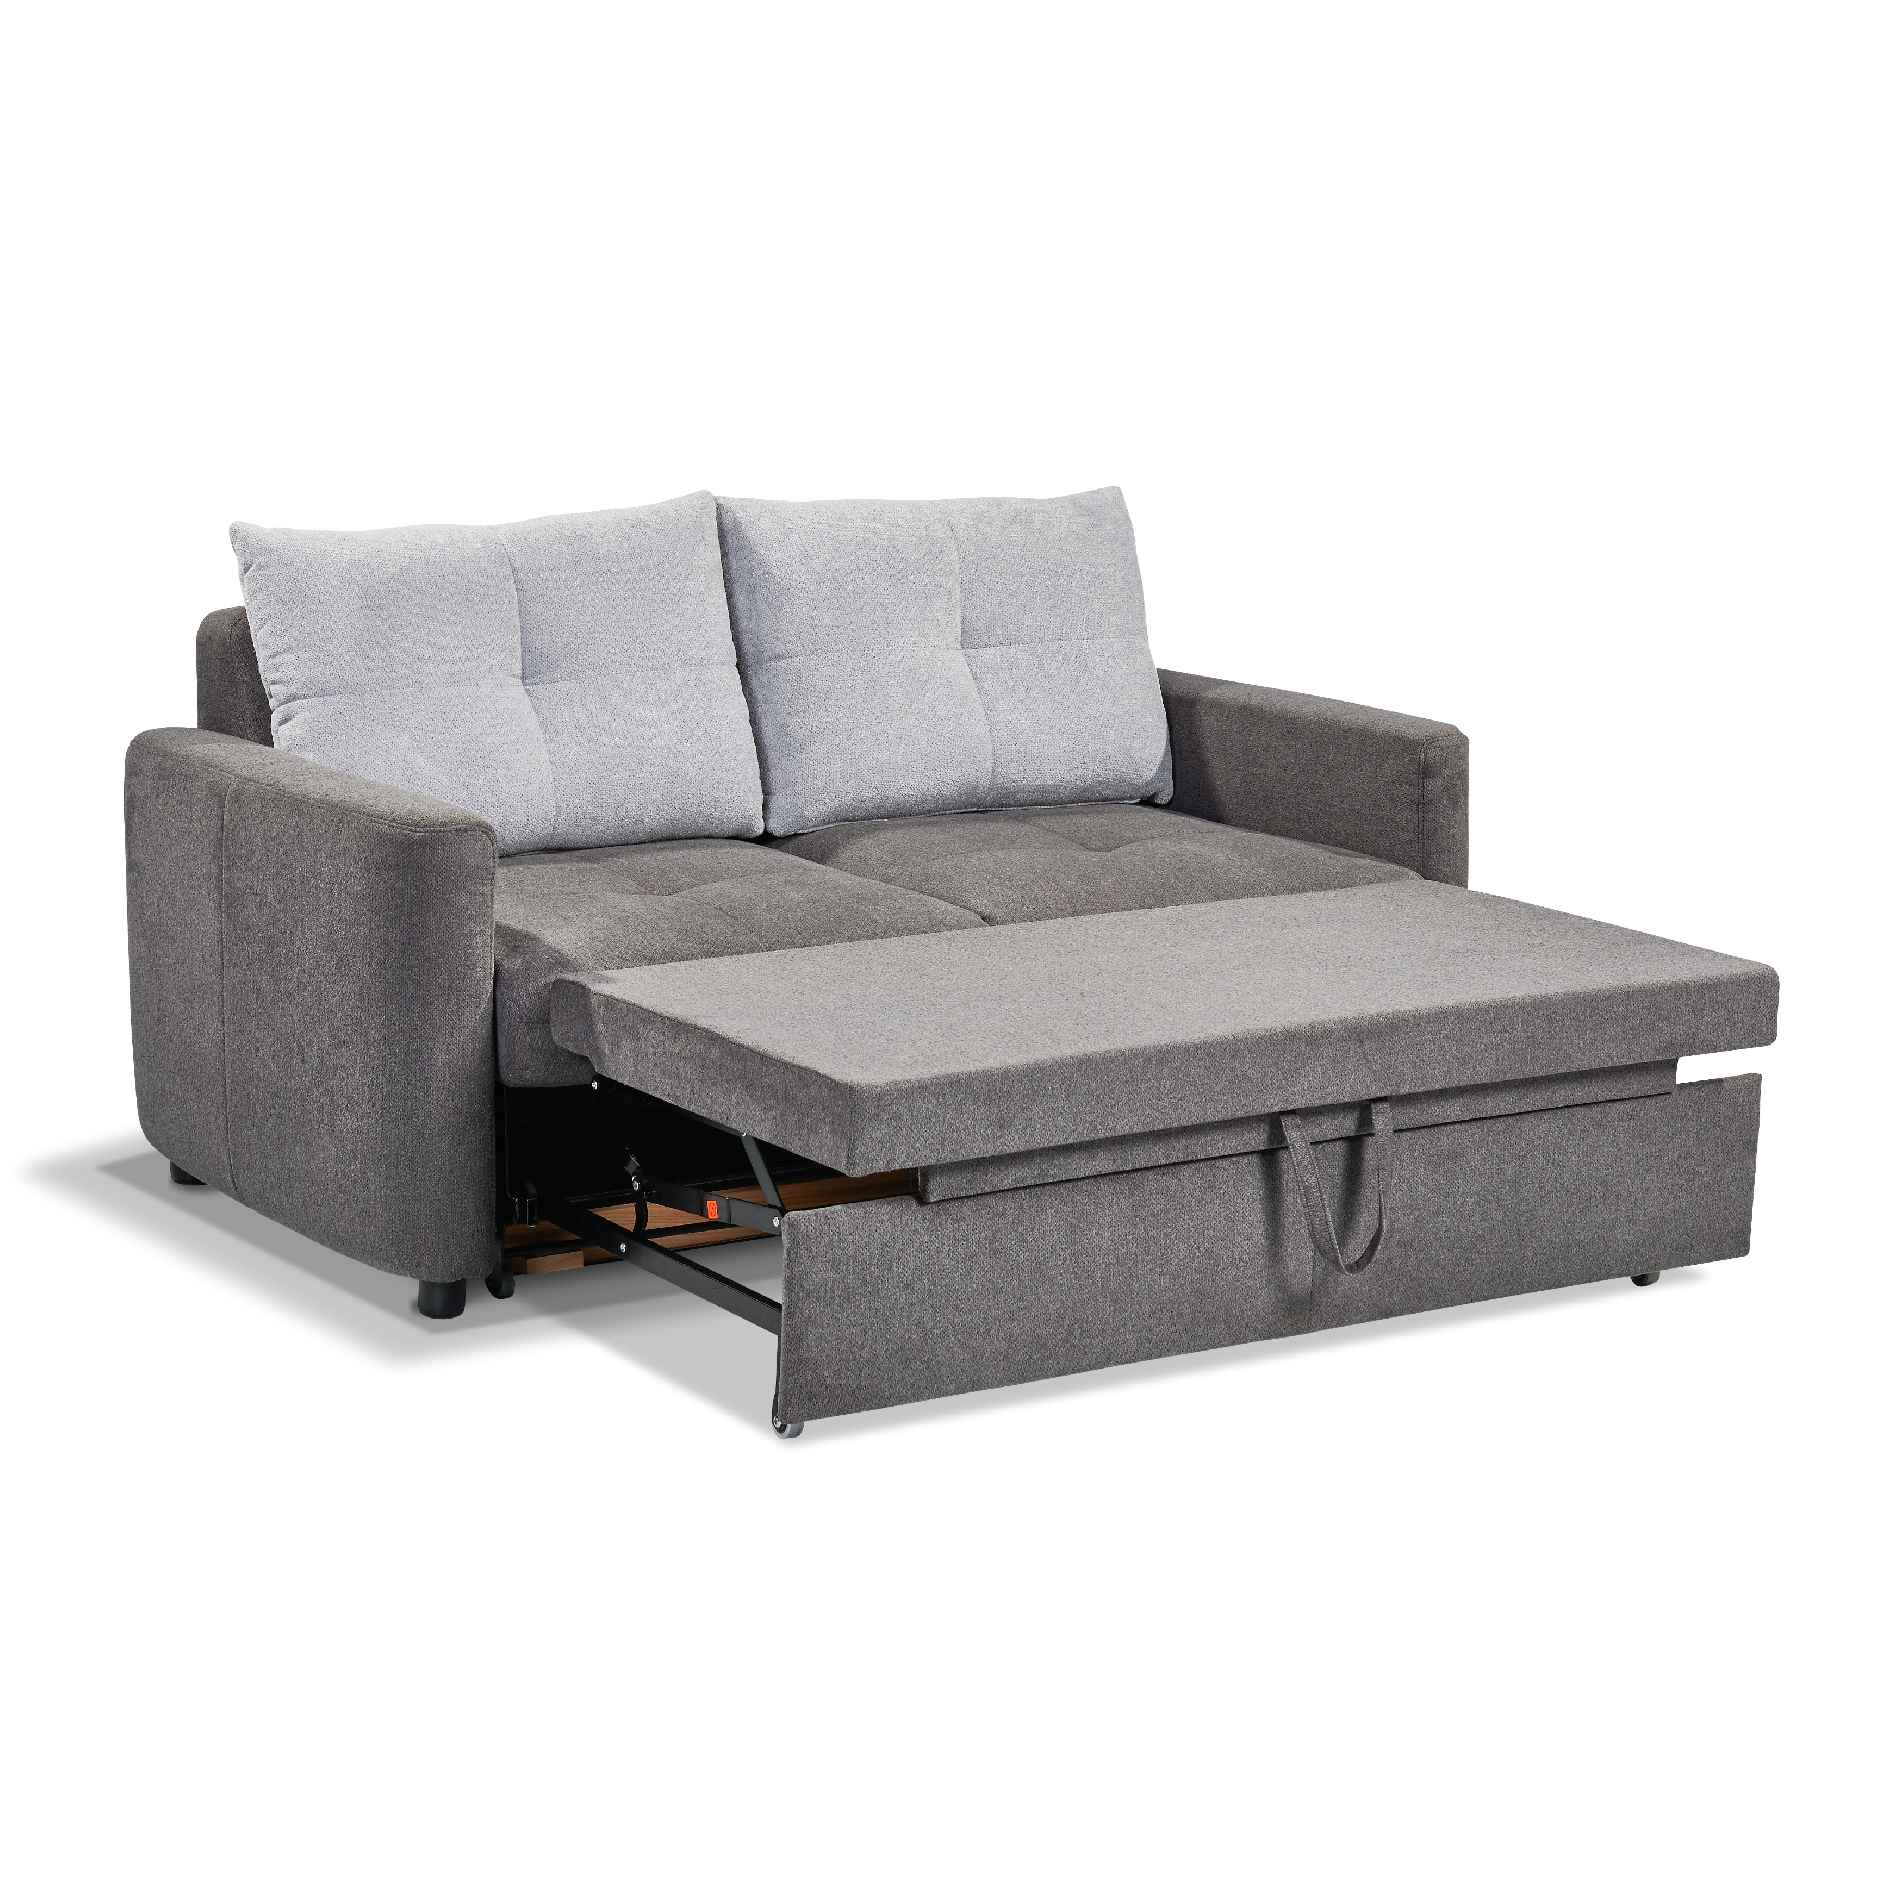 set one by Musterring SO 4200 Sofa Bezug fango – Schlaffunktion